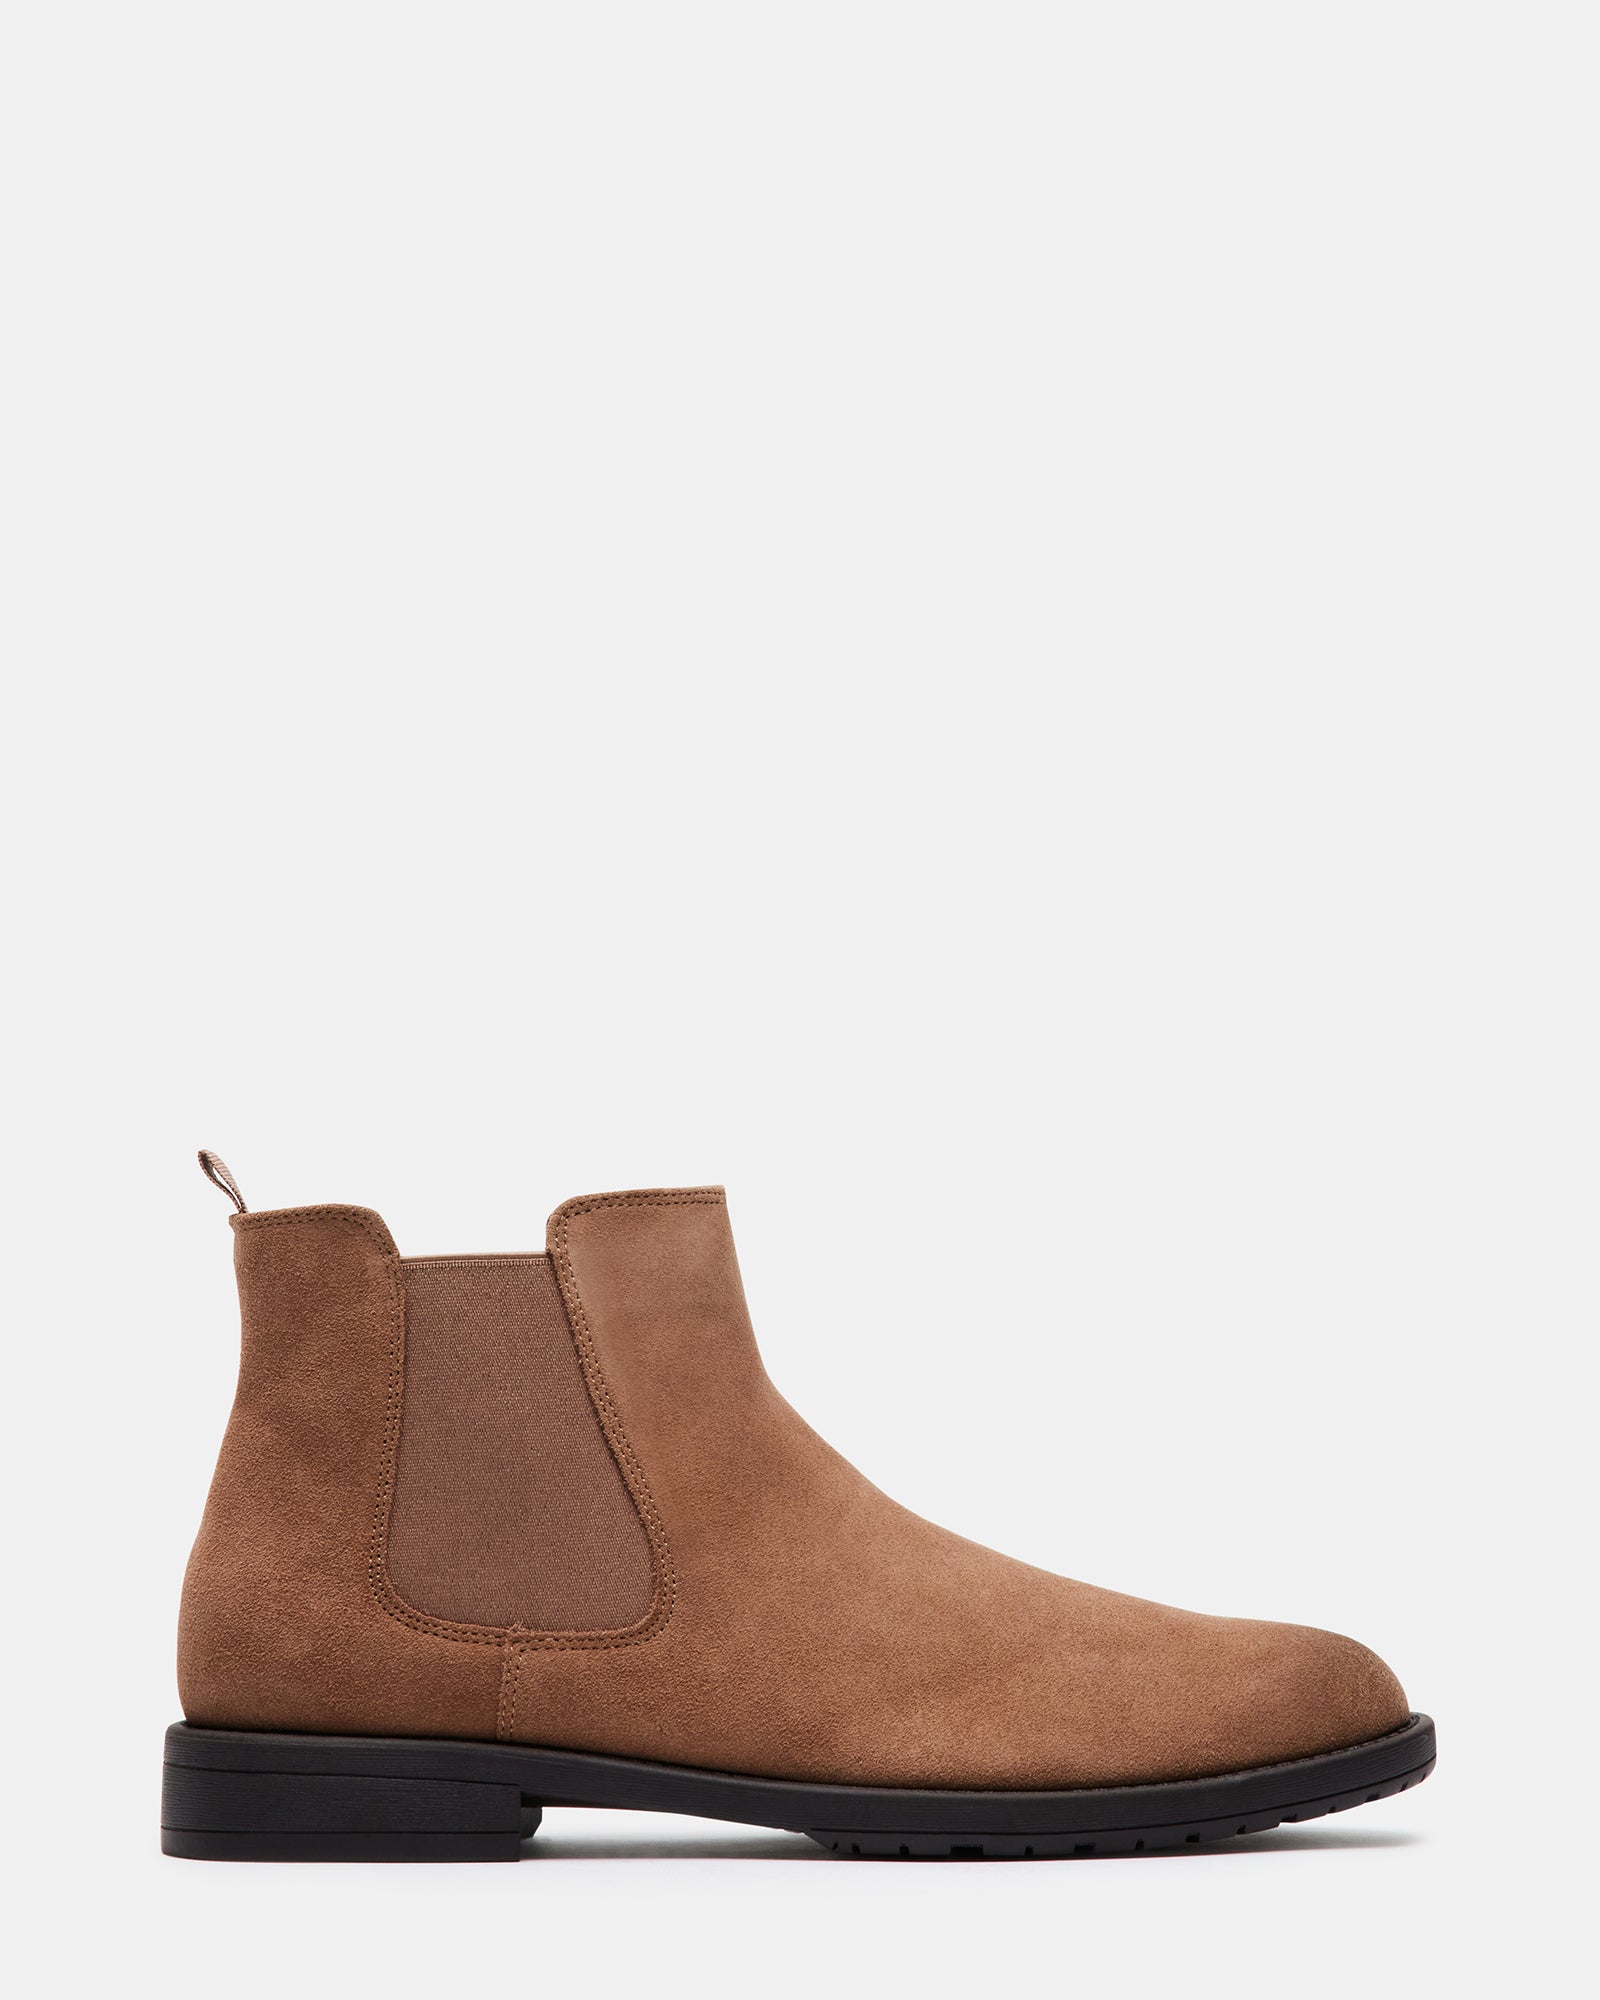 COLLEY Taupe Suede Chelsea Ankle Boot | Men's Boots – Steve Madden